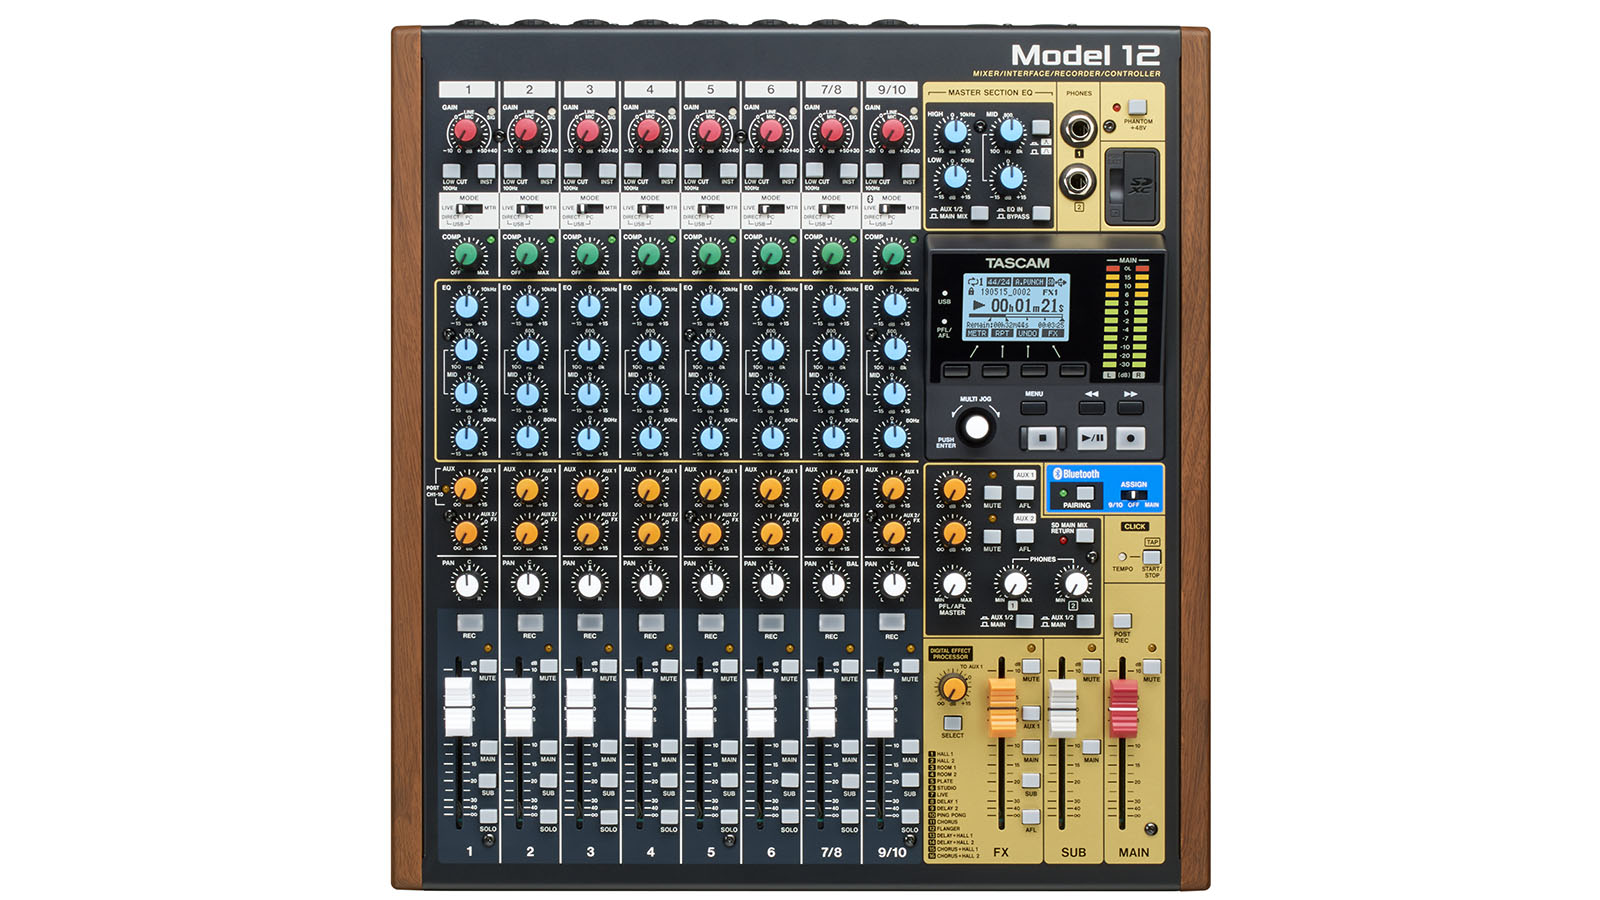 First Look : TASCAM Model 12 Mixer/Recorder/Interface